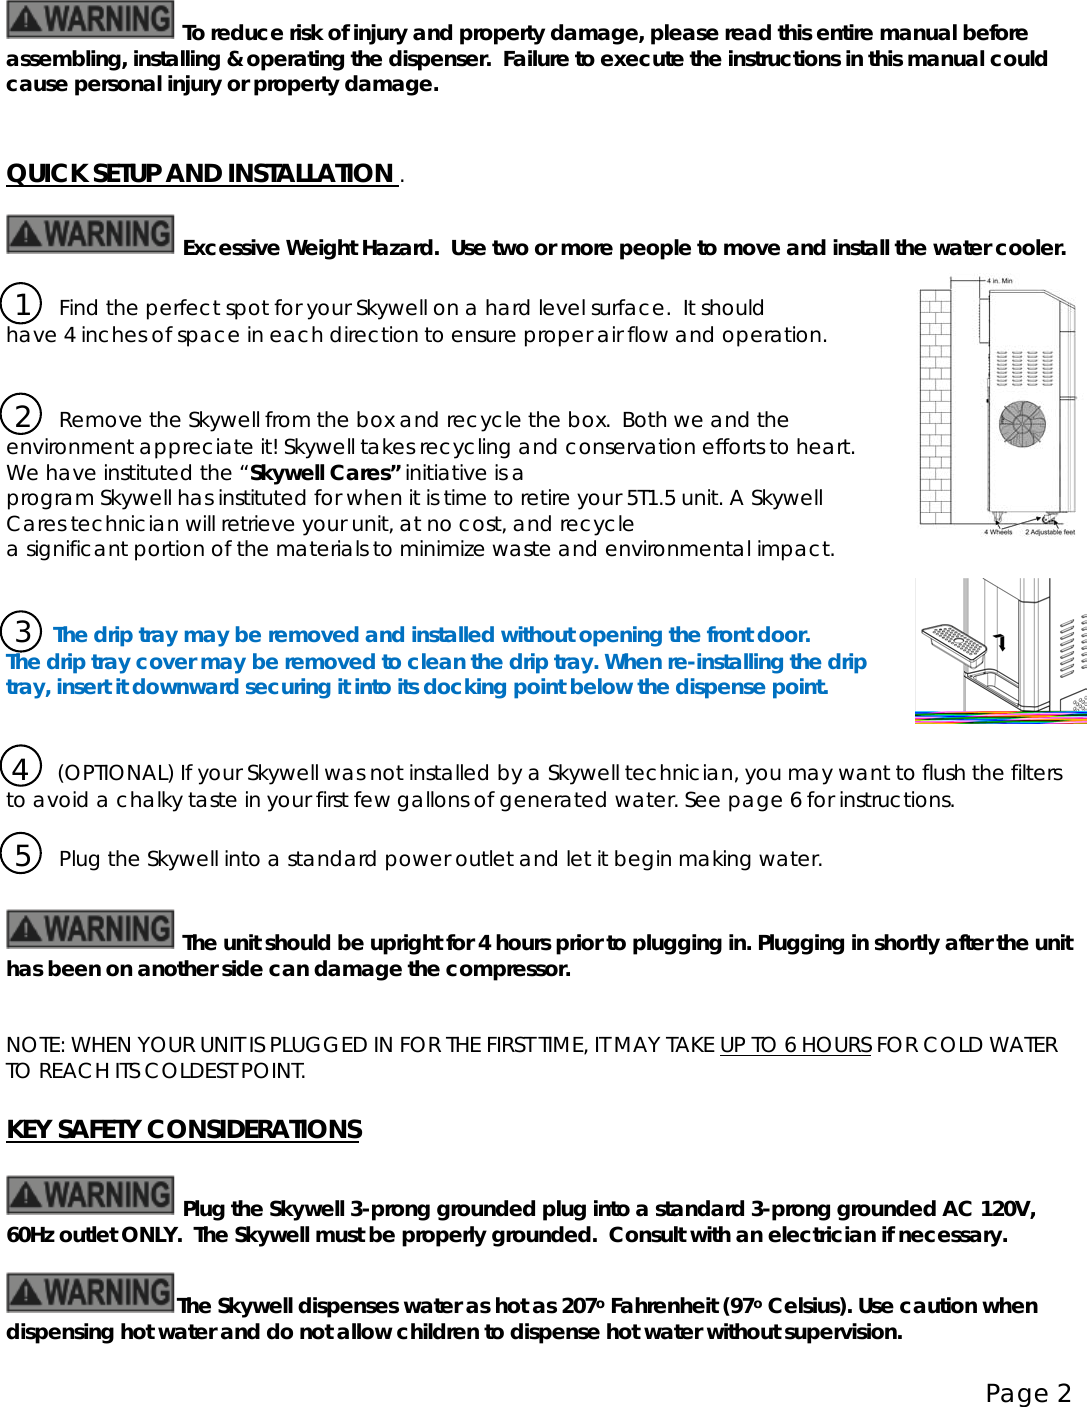 Page 2    To reduce risk of injury and property damage, please read this entire manual before assembling, installing &amp; operating the dispenser.  Failure to execute the instructions in this manual could cause personal injury or property damage.   QUICK SETUP AND INSTALLATION  .                                                          Excessive Weight Hazard.  Use two or more people to move and install the water cooler.   1     Find the perfect spot for your Skywell on a hard level surface.  It should  have 4 inches of space in each direction to ensure proper air flow and operation.     2     Remove the Skywell from the box and recycle the box.  Both we and the environment appreciate it! Skywell takes recycling and conservation efforts to heart.  We have instituted the “Skywell Cares” initiative is a program Skywell has instituted for when it is time to retire your 5T1.5 unit. A Skywell Cares technician will retrieve your unit, at no cost, and recycle a significant portion of the materials to minimize waste and environmental impact.             3    The drip tray may be removed and installed without opening the front door. The drip tray cover may be removed to clean the drip tray. When re-installing the drip  tray, insert it downward securing it into its docking point below the dispense point.     4     (OPTIONAL) If your Skywell was not installed by a Skywell technician, you may want to flush the filters to avoid a chalky taste in your first few gallons of generated water. See page 6 for instructions.   5     Plug the Skywell into a standard power outlet and let it begin making water.    The unit should be upright for 4 hours prior to plugging in. Plugging in shortly after the unit has been on another side can damage the compressor.   NOTE: WHEN YOUR UNIT IS PLUGGED IN FOR THE FIRST TIME, IT MAY TAKE UP TO 6 HOURS  FOR COLD WATER TO REACH ITS COLDEST POINT.  KEY SAFETY CONSIDERATIONS                                                           Plug the Skywell 3-prong grounded plug into a standard 3-prong grounded AC 120V, 60Hz outlet ONLY.  The Skywell must be properly grounded.  Consult with an electrician if necessary.  The Skywell dispenses water as hot as 207o Fahrenheit (97o    Celsius). Use caution when dispensing hot water and do not allow children to dispense hot water without supervision. 